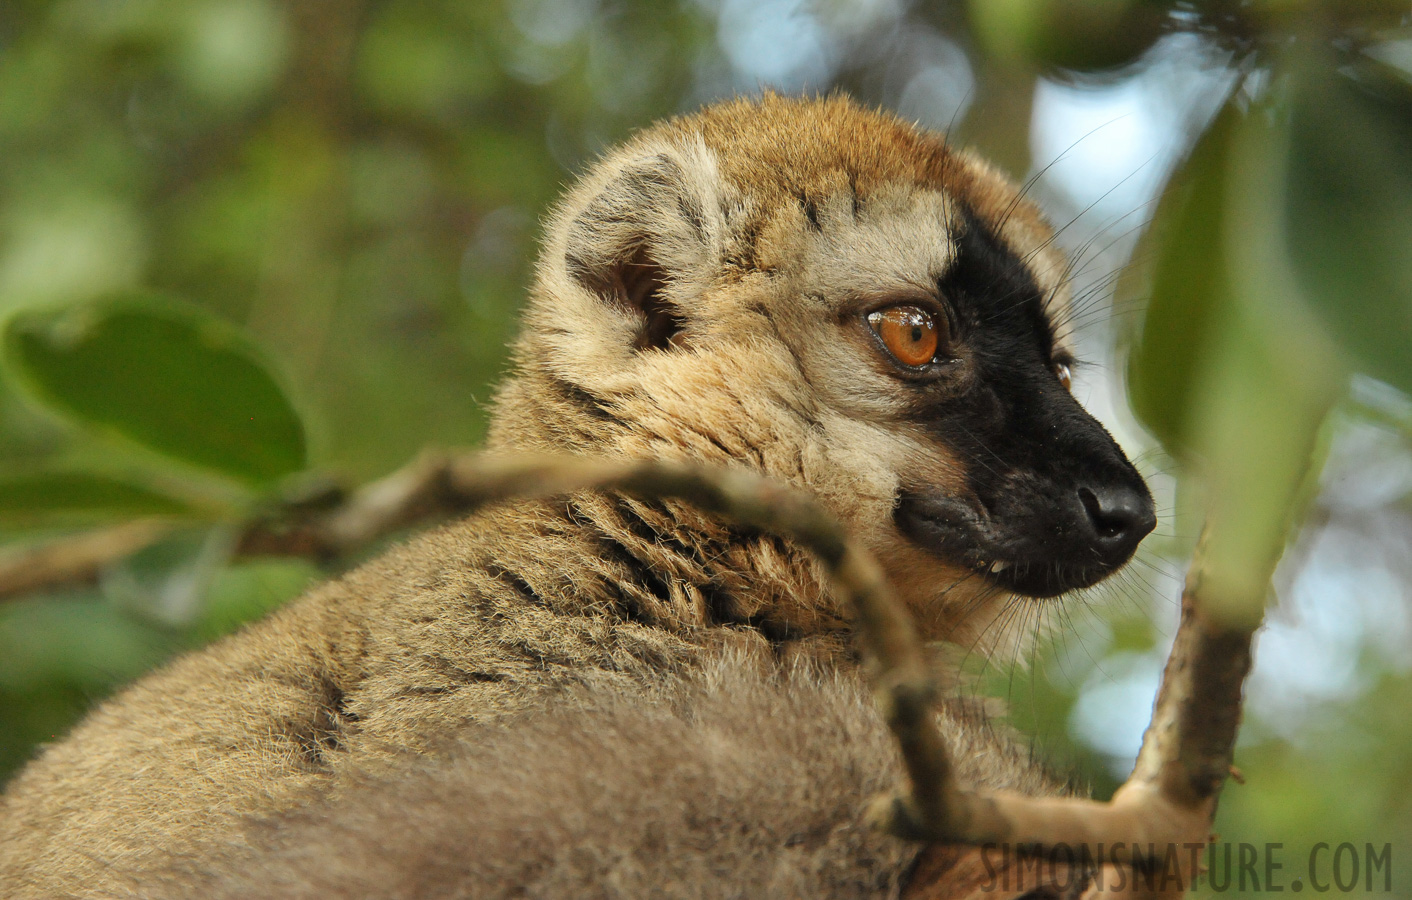 Eulemur rufifrons [300 mm, 1/400 Sek. bei f / 9.0, ISO 4000]